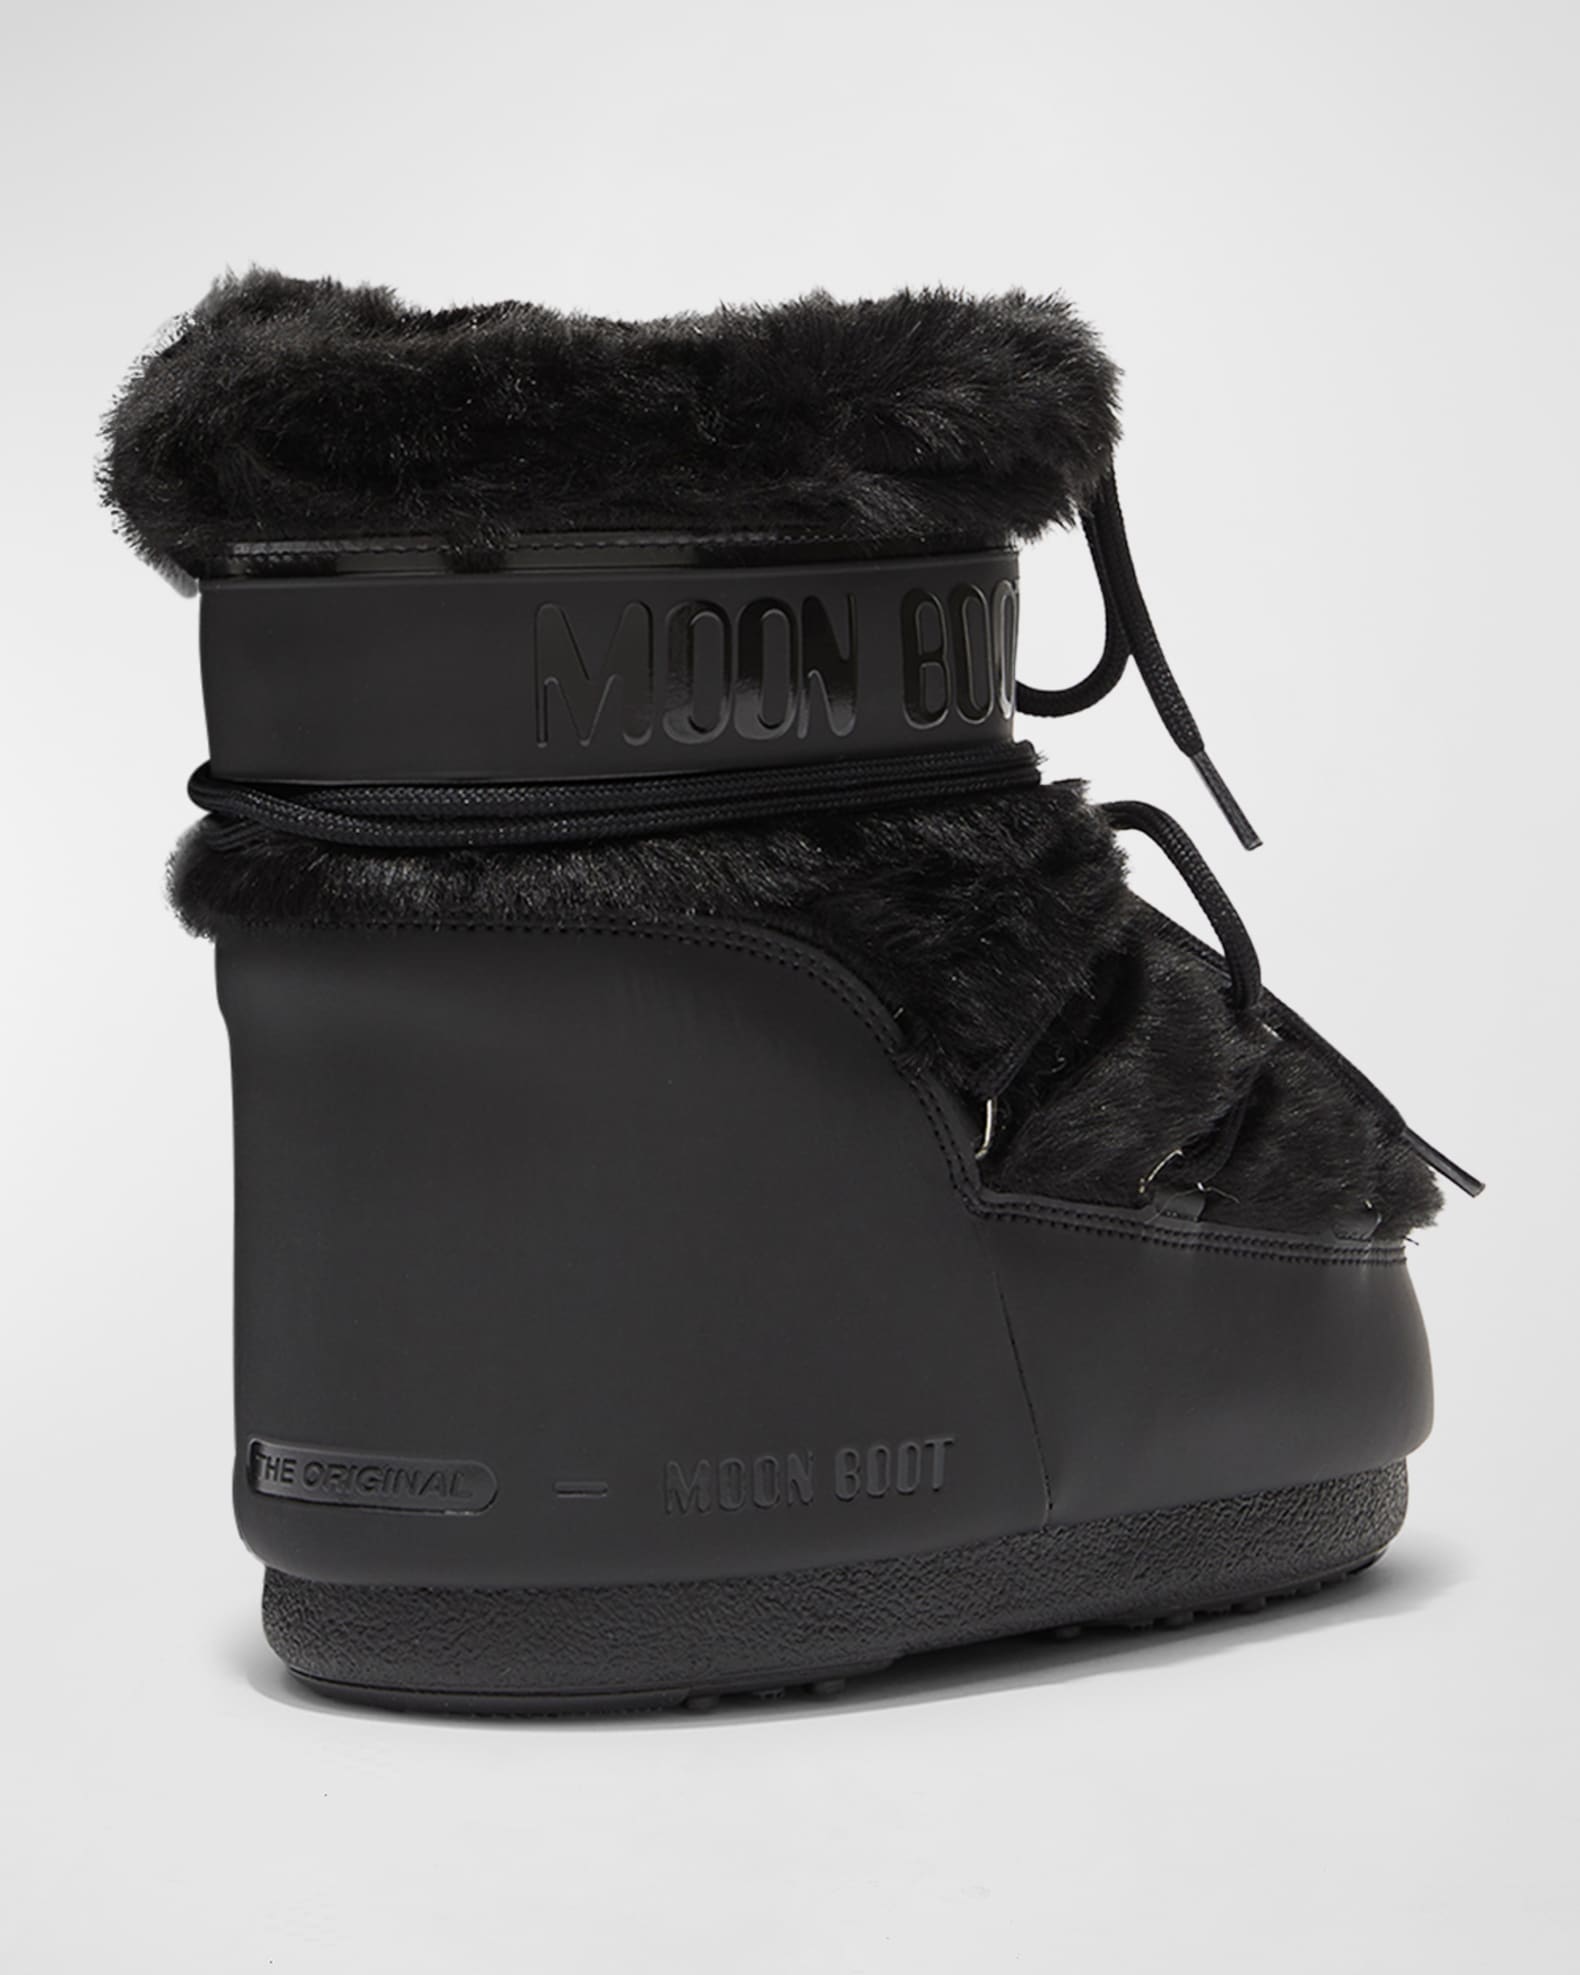 Black Icon snow boots, Moon Boot